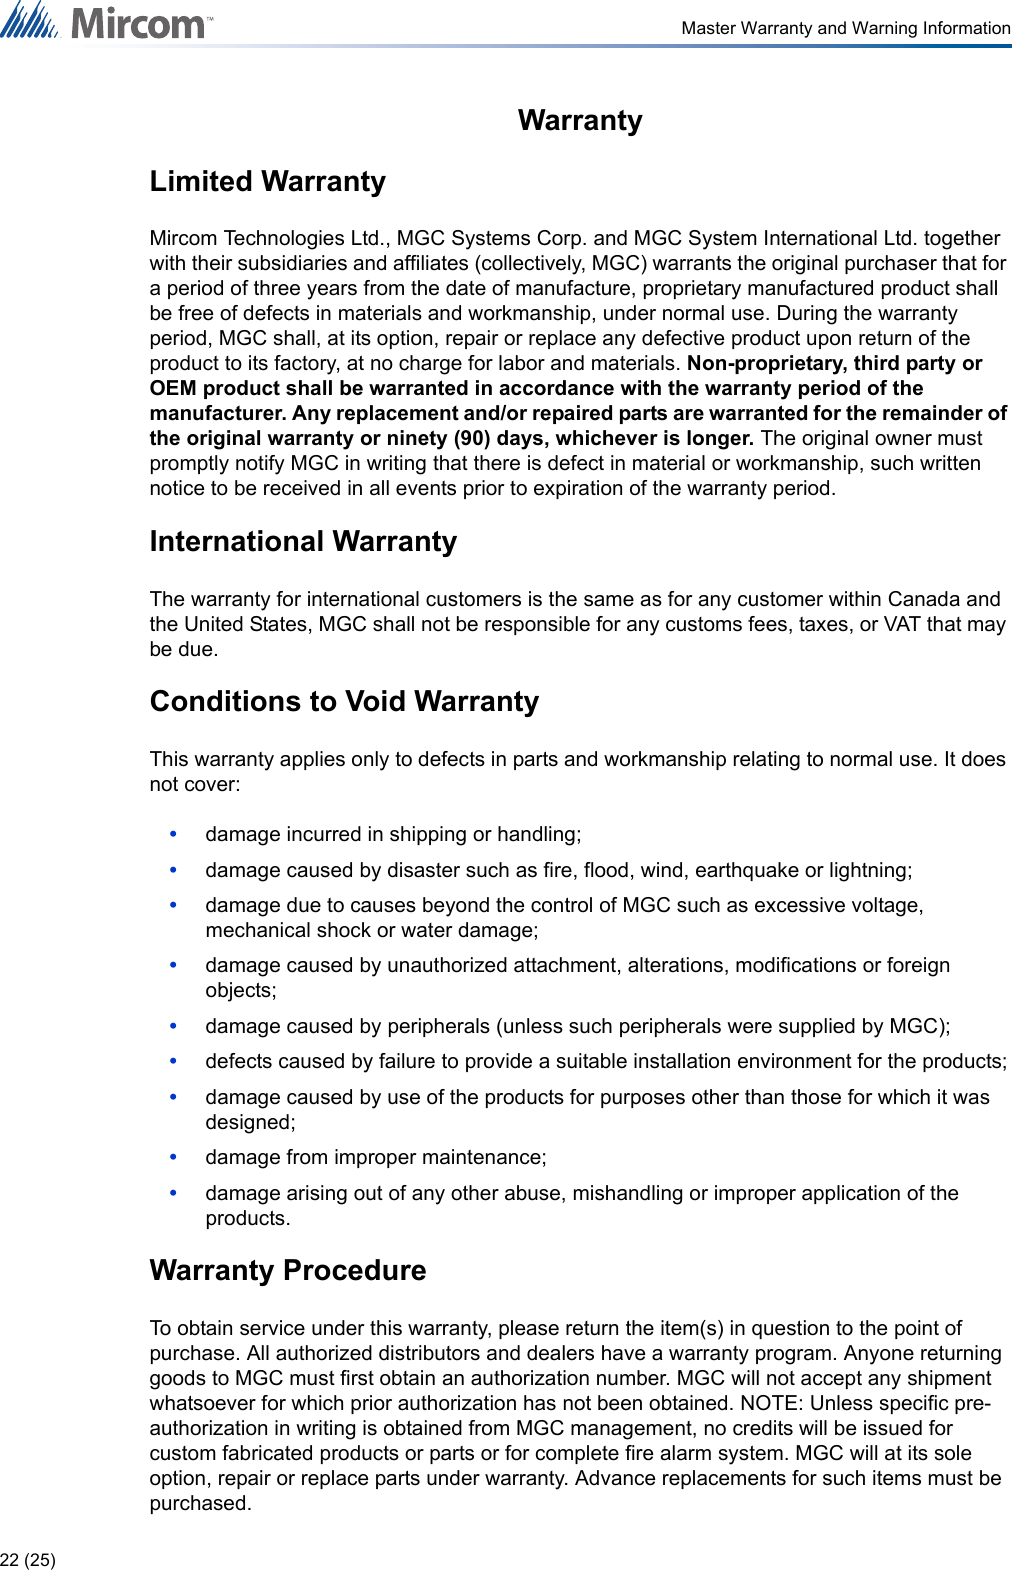 22 (25)Master Warranty and Warning InformationWarrantyLimited WarrantyMircom Technologies Ltd., MGC Systems Corp. and MGC System International Ltd. together with their subsidiaries and affiliates (collectively, MGC) warrants the original purchaser that for a period of three years from the date of manufacture, proprietary manufactured product shall be free of defects in materials and workmanship, under normal use. During the warranty period, MGC shall, at its option, repair or replace any defective product upon return of the product to its factory, at no charge for labor and materials. Non-proprietary, third party or OEM product shall be warranted in accordance with the warranty period of the manufacturer. Any replacement and/or repaired parts are warranted for the remainder of the original warranty or ninety (90) days, whichever is longer. The original owner must promptly notify MGC in writing that there is defect in material or workmanship, such written notice to be received in all events prior to expiration of the warranty period.International WarrantyThe warranty for international customers is the same as for any customer within Canada and the United States, MGC shall not be responsible for any customs fees, taxes, or VAT that may be due.Conditions to Void WarrantyThis warranty applies only to defects in parts and workmanship relating to normal use. It does not cover:•damage incurred in shipping or handling;•damage caused by disaster such as fire, flood, wind, earthquake or lightning;•damage due to causes beyond the control of MGC such as excessive voltage, mechanical shock or water damage;•damage caused by unauthorized attachment, alterations, modifications or foreign objects;•damage caused by peripherals (unless such peripherals were supplied by MGC);•defects caused by failure to provide a suitable installation environment for the products;•damage caused by use of the products for purposes other than those for which it was designed;•damage from improper maintenance;•damage arising out of any other abuse, mishandling or improper application of the products.Warranty ProcedureTo obtain service under this warranty, please return the item(s) in question to the point of purchase. All authorized distributors and dealers have a warranty program. Anyone returning goods to MGC must first obtain an authorization number. MGC will not accept any shipment whatsoever for which prior authorization has not been obtained. NOTE: Unless specific pre- authorization in writing is obtained from MGC management, no credits will be issued for custom fabricated products or parts or for complete fire alarm system. MGC will at its sole option, repair or replace parts under warranty. Advance replacements for such items must be purchased.